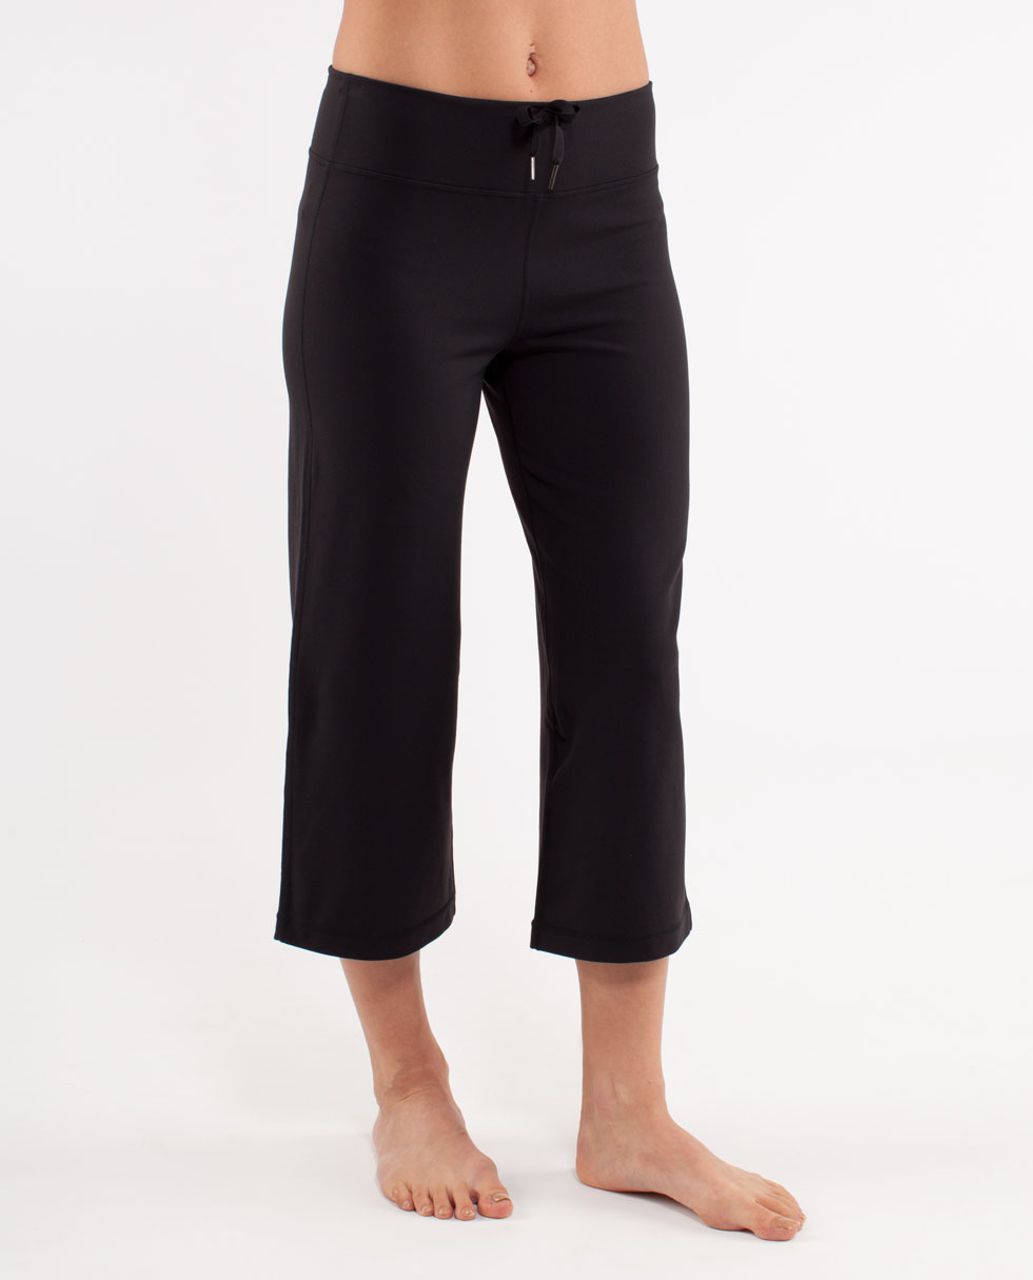 RELAXED FIT CROPPED LEGGINGS